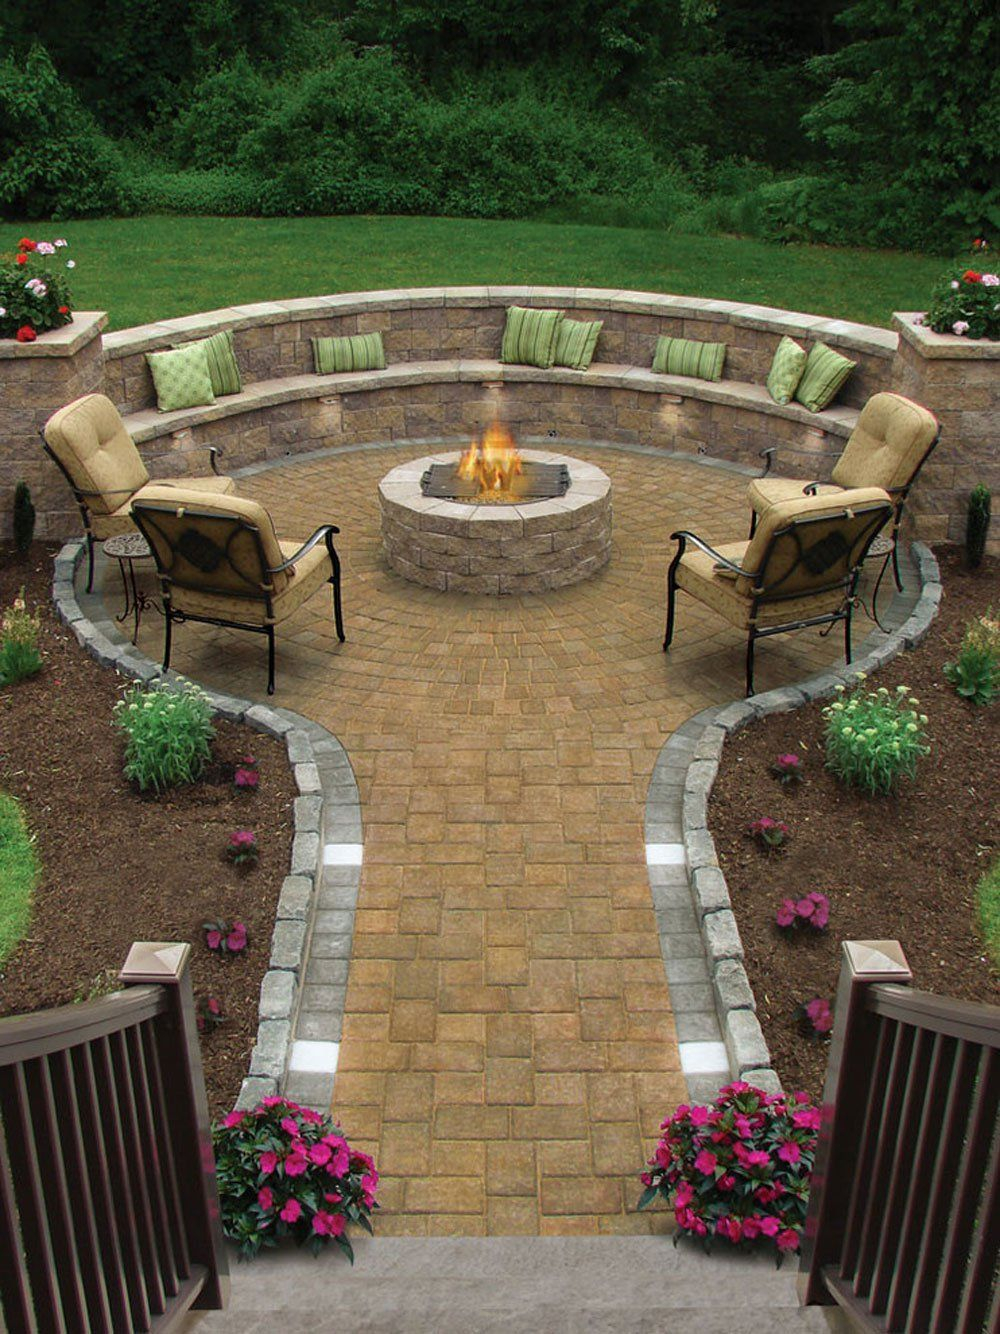 17 Of The Most Amazing Seating Area Around The Fire Pit Ever intended for dimensions 1000 X 1334